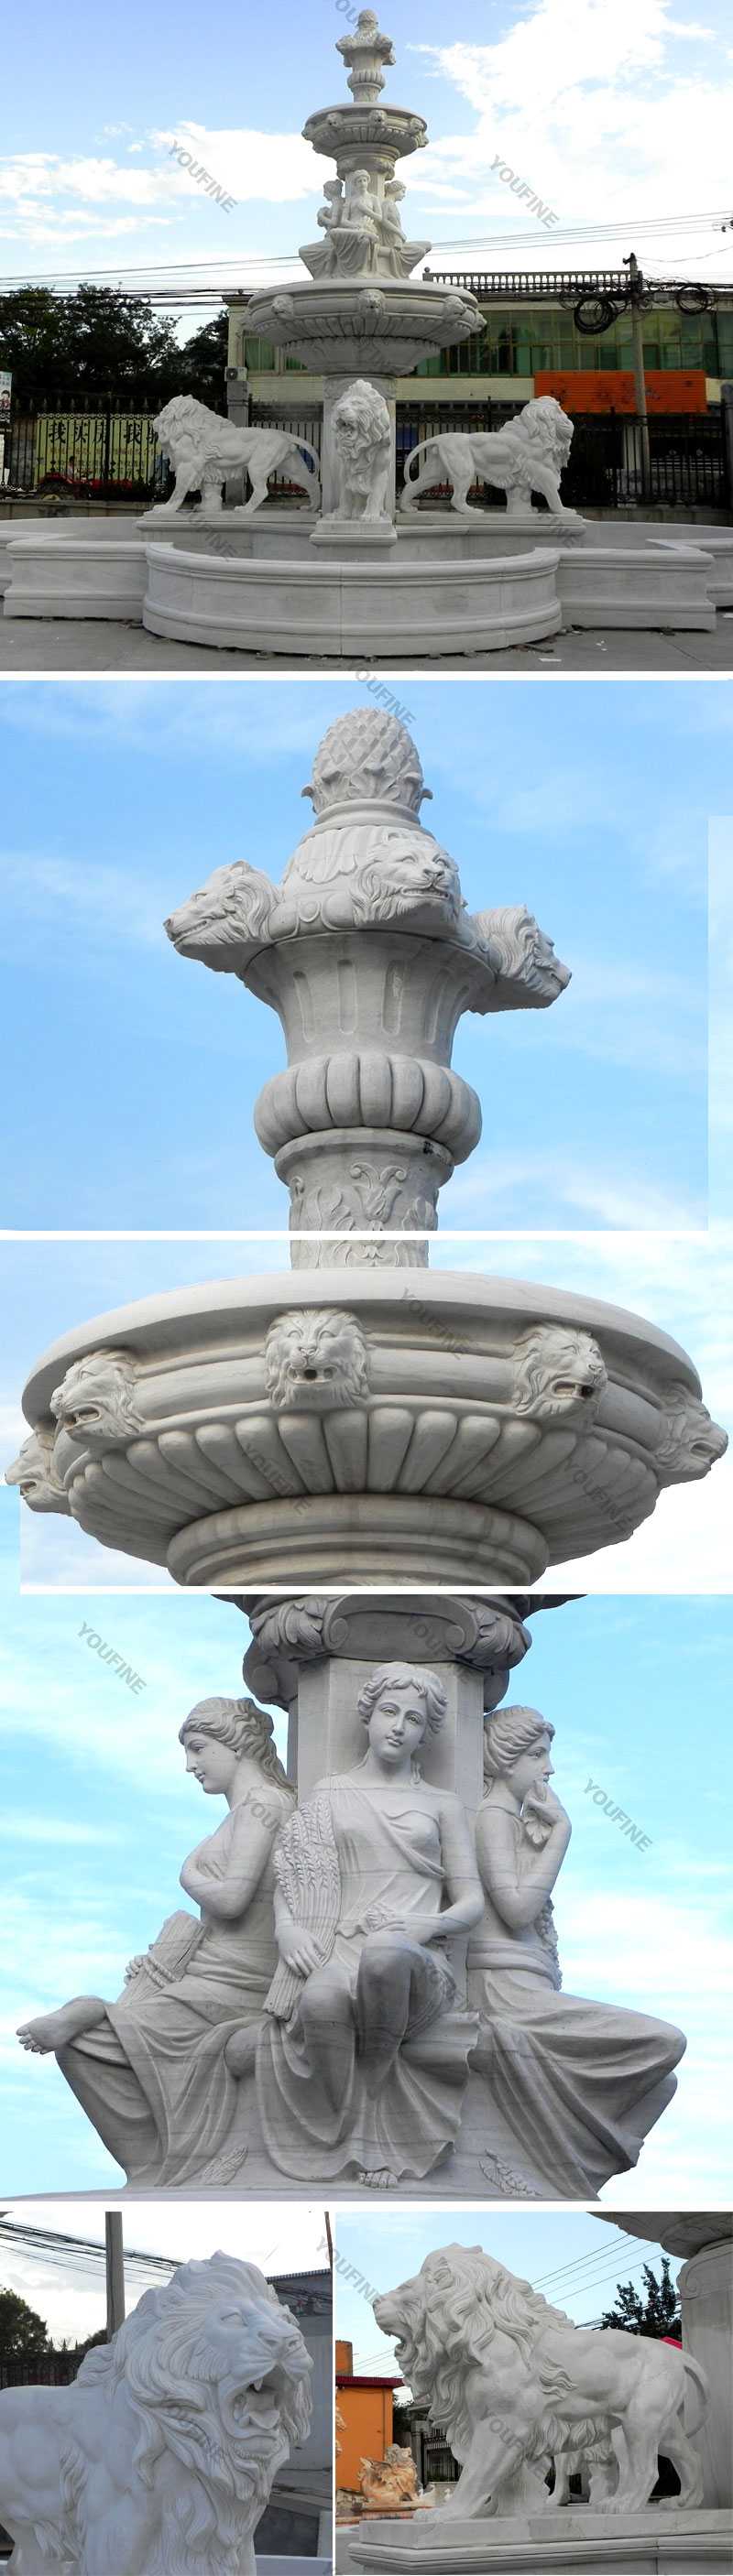 The details of giant water features with lion statues designs